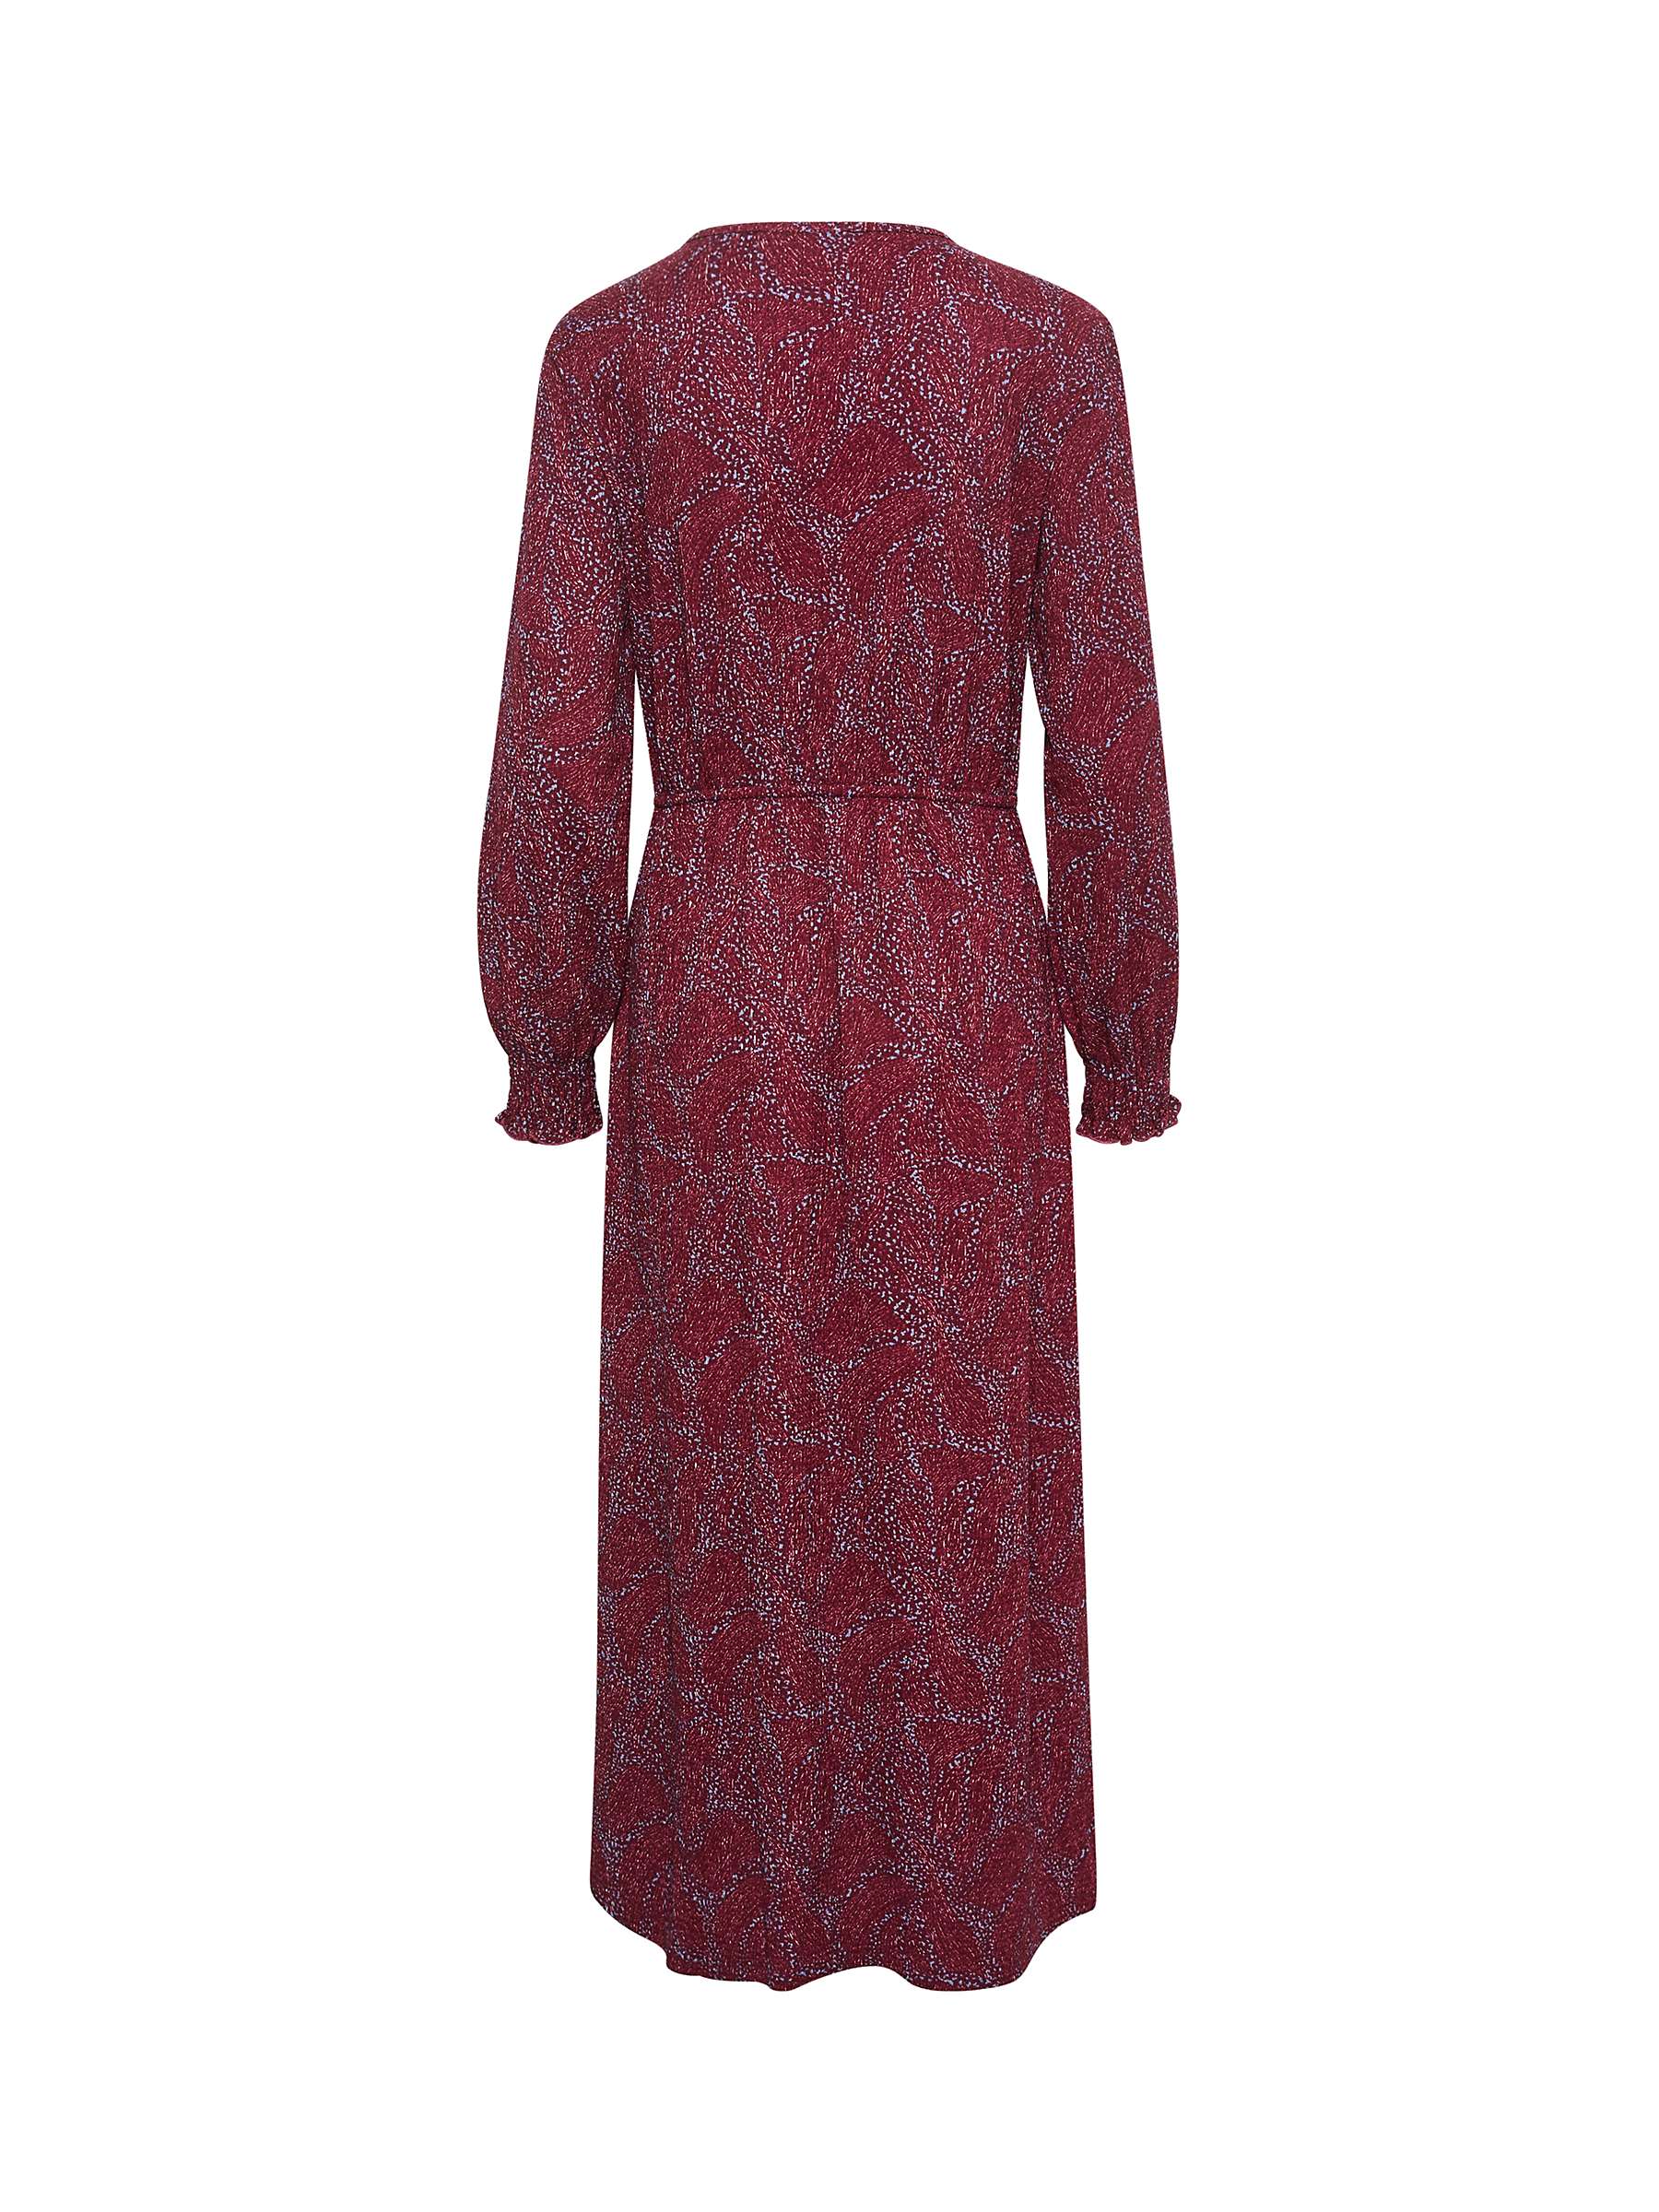 Buy Saint Tropez Averie Abstract Print Maxi Dress, Red/Multi Online at johnlewis.com